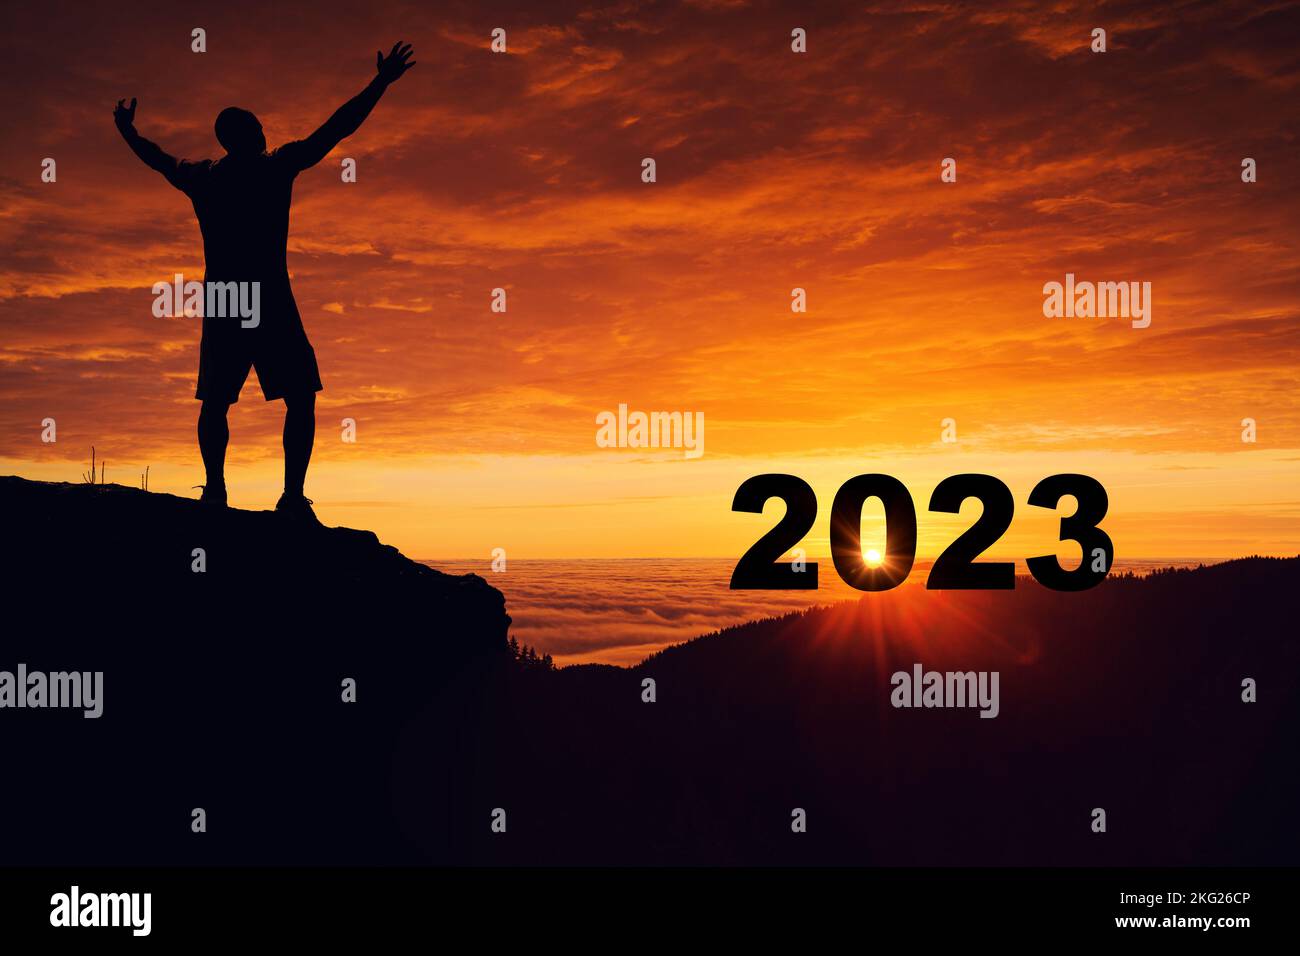 Man silhouette on the mountain top watching the sunrise and 2023 years while celebrating. Stock Photo